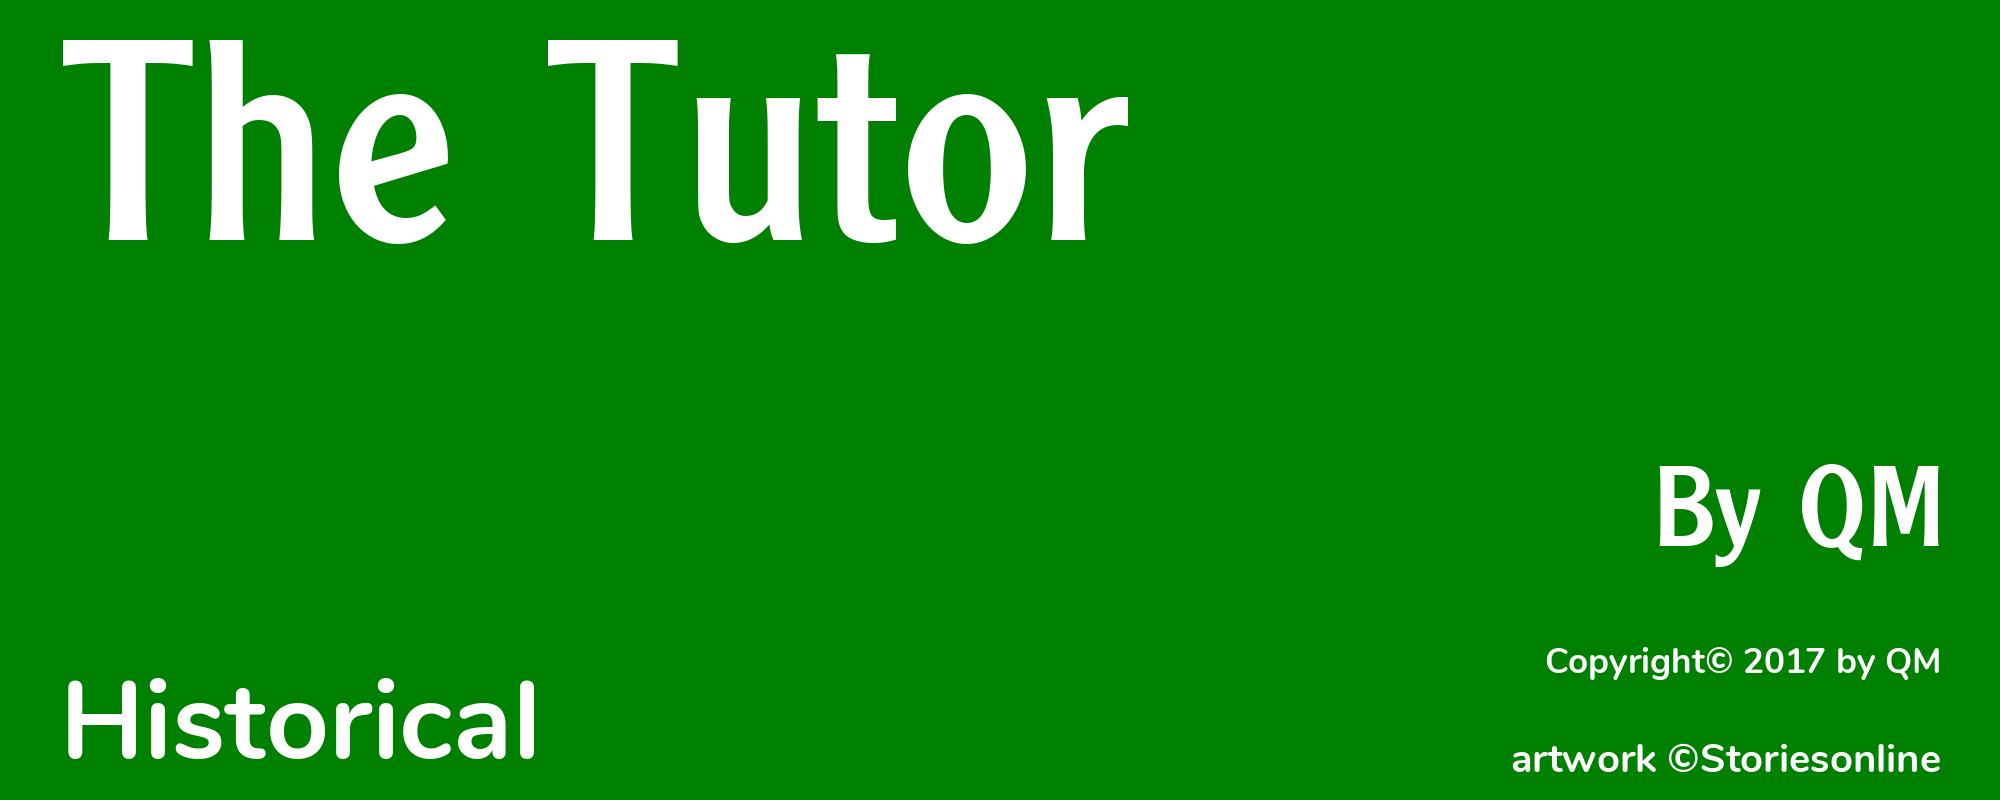 The Tutor - Cover